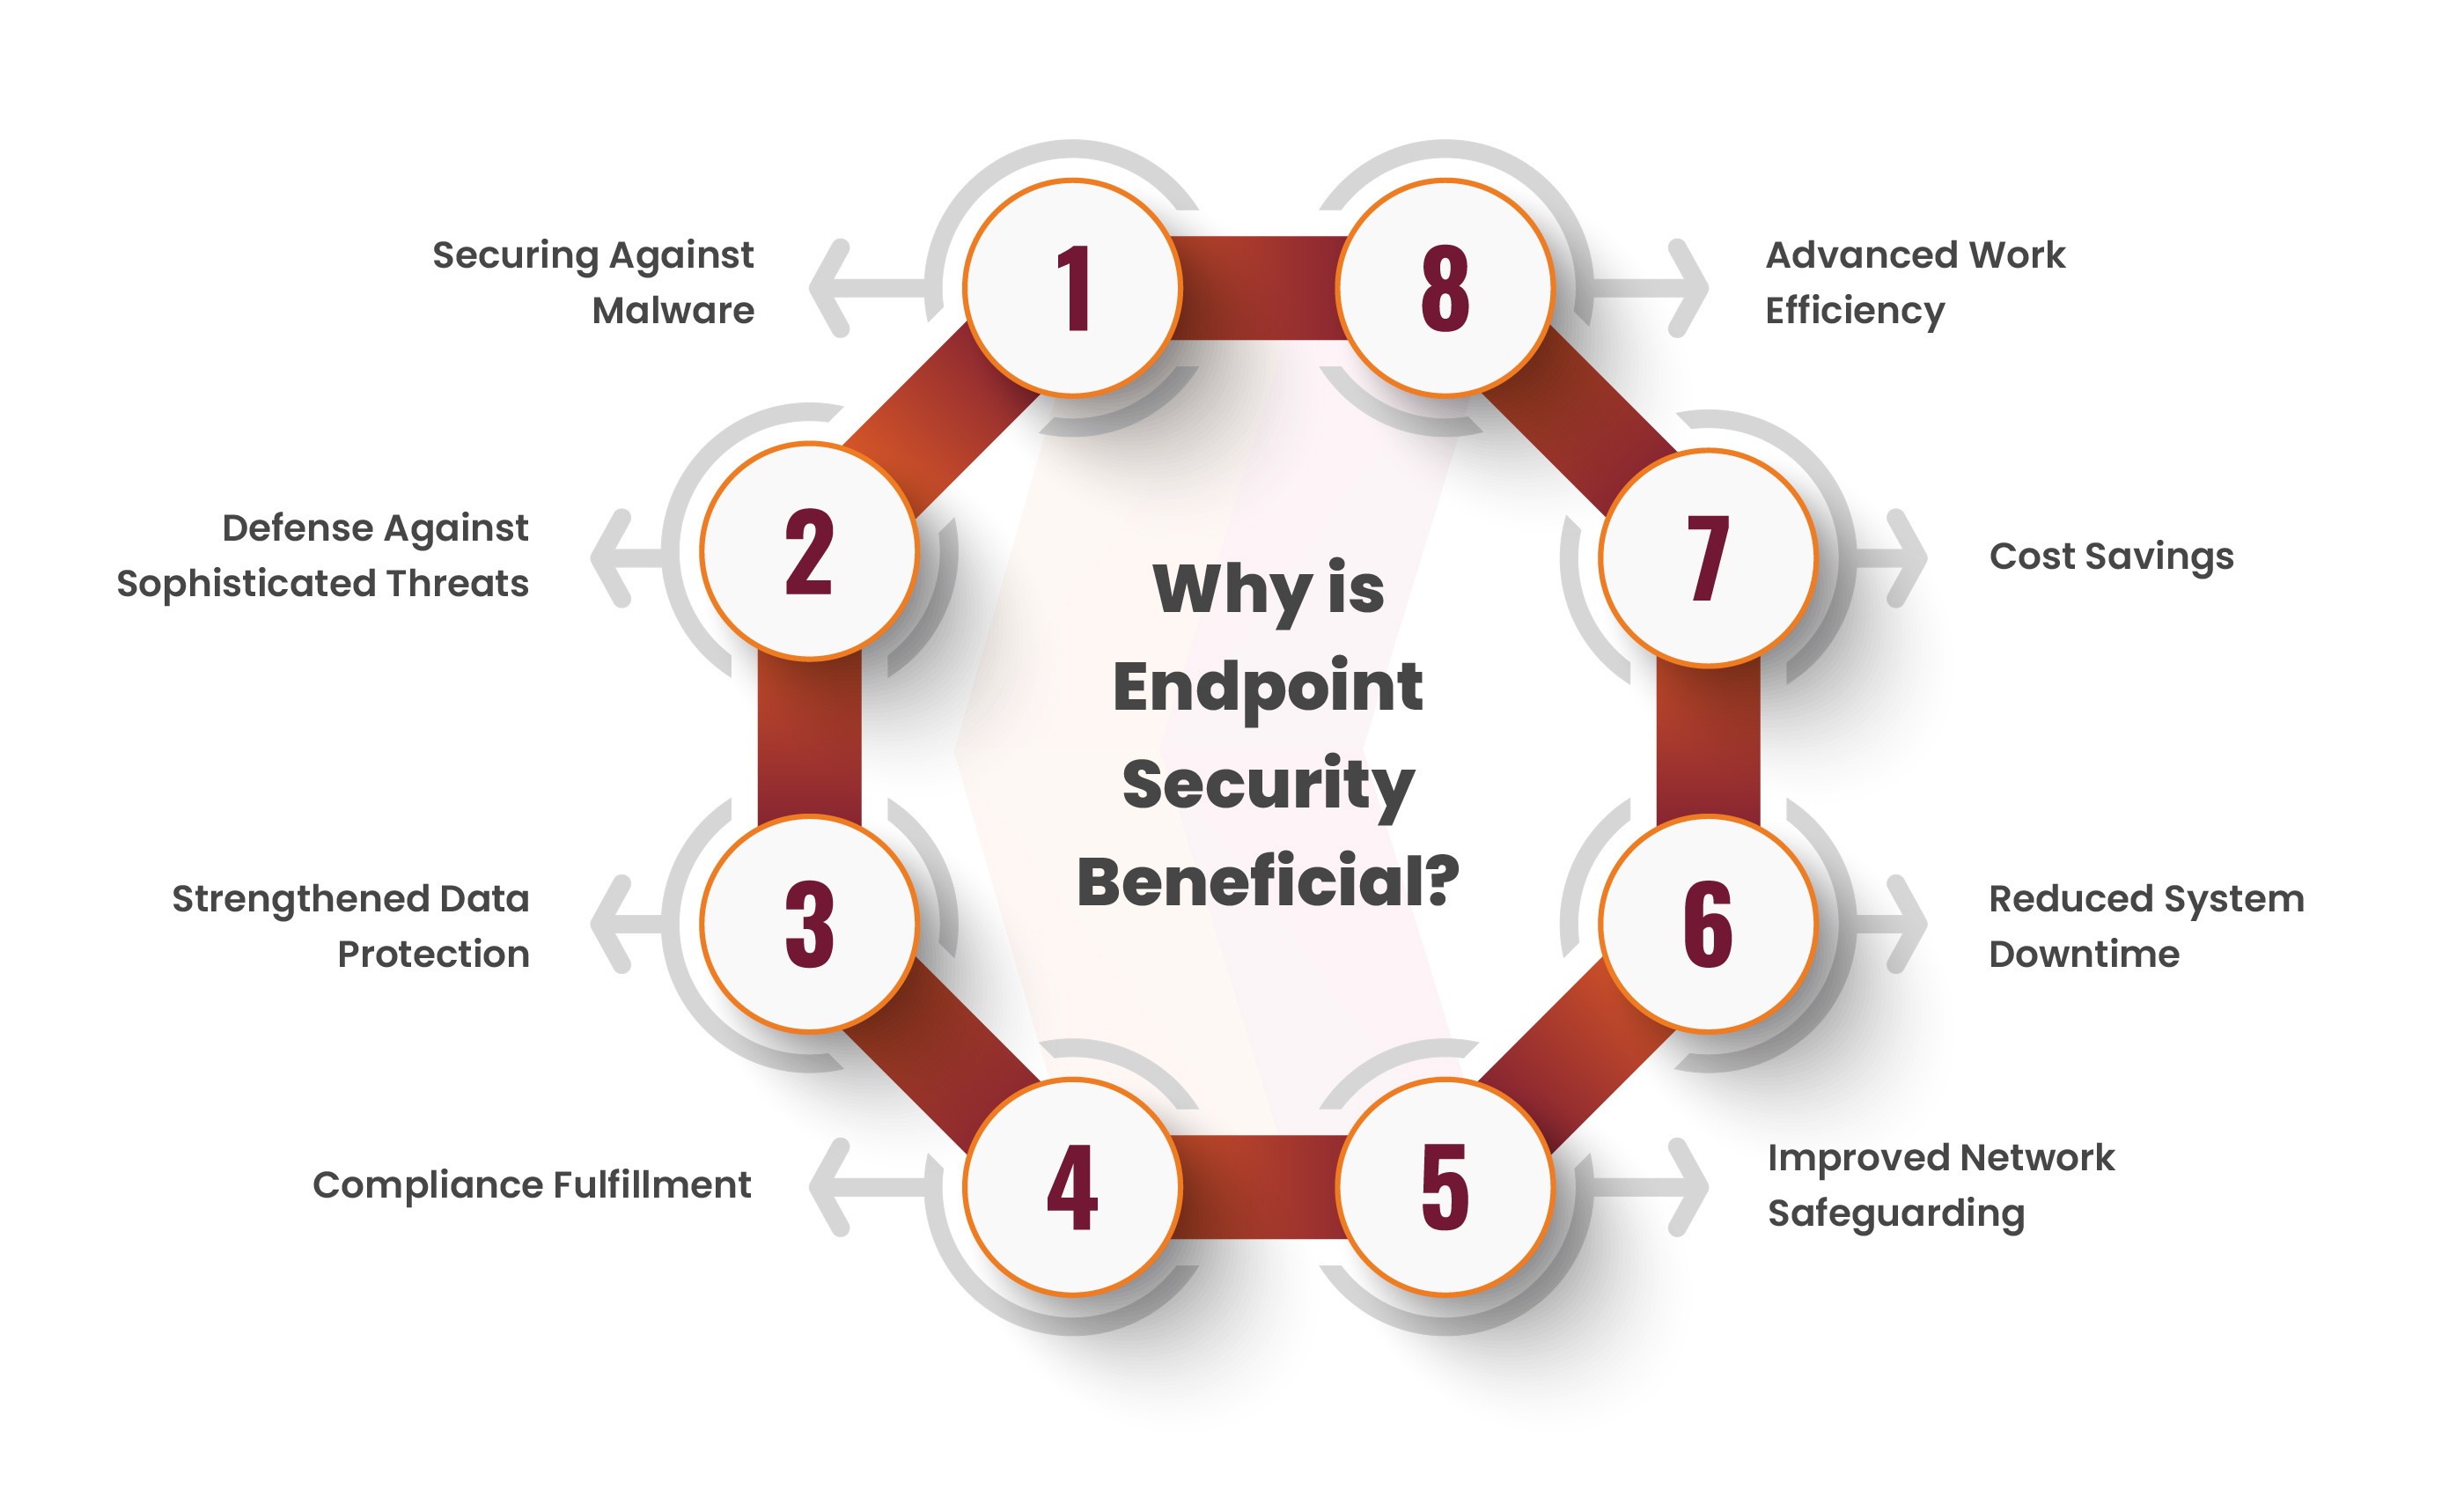 Benefits of Endpoint Security to Secure IT Infrastructure